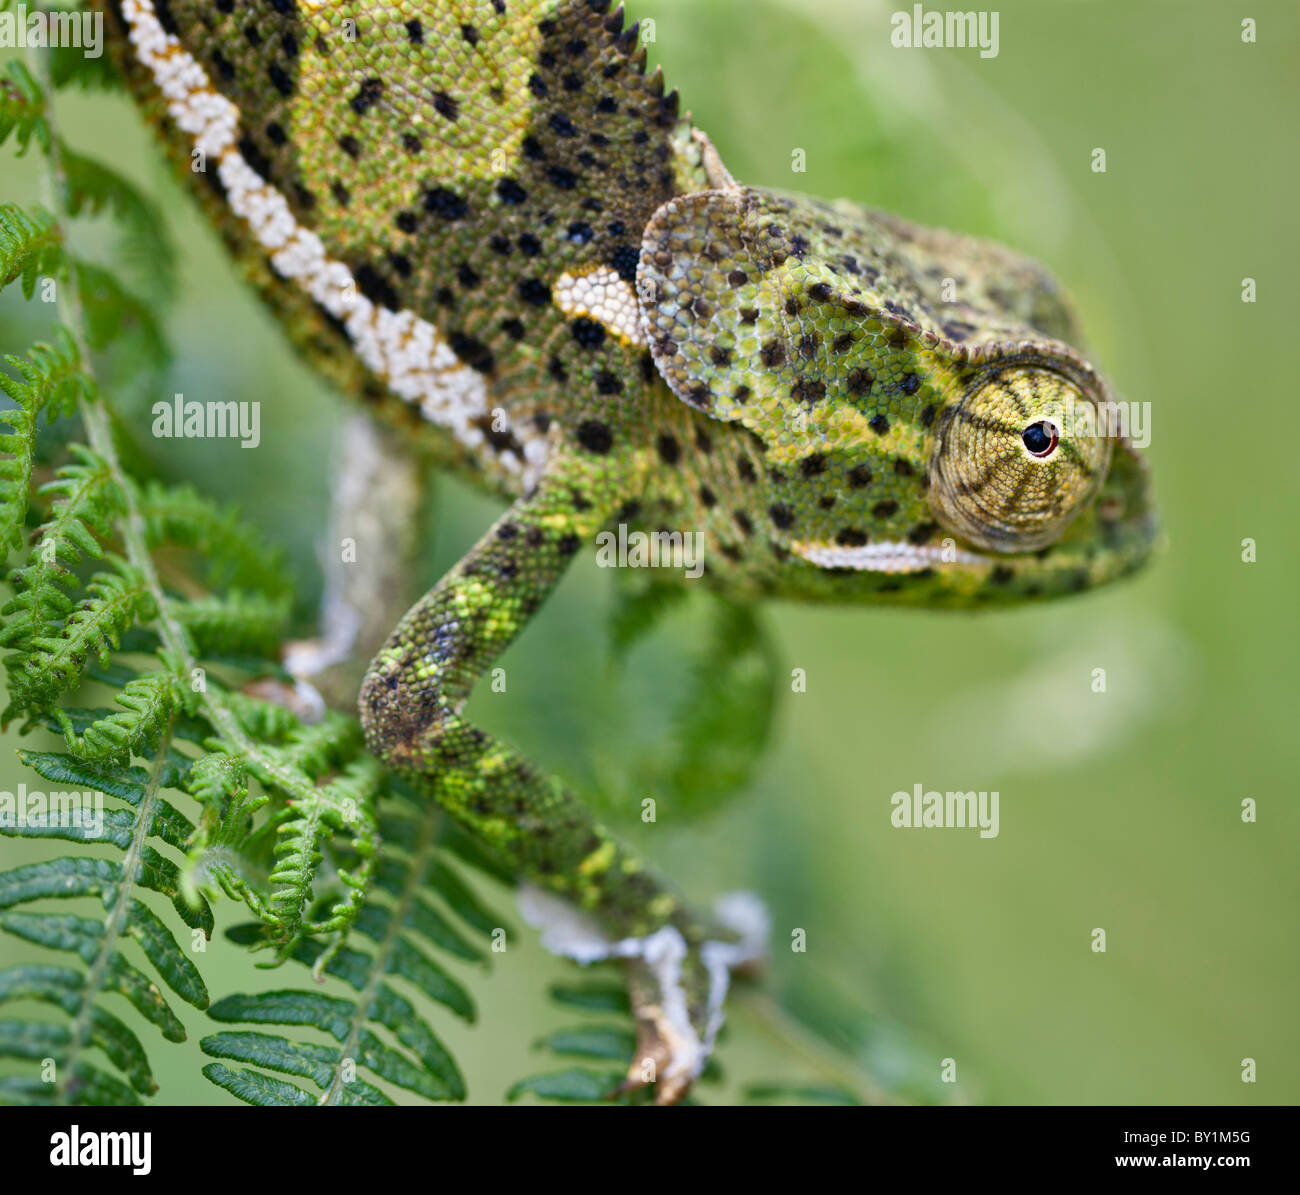 A female two-horned chameleon in the Amani Nature Reserve, a protected area of 8,380ha situated in the Eastern Arc of the Stock Photo